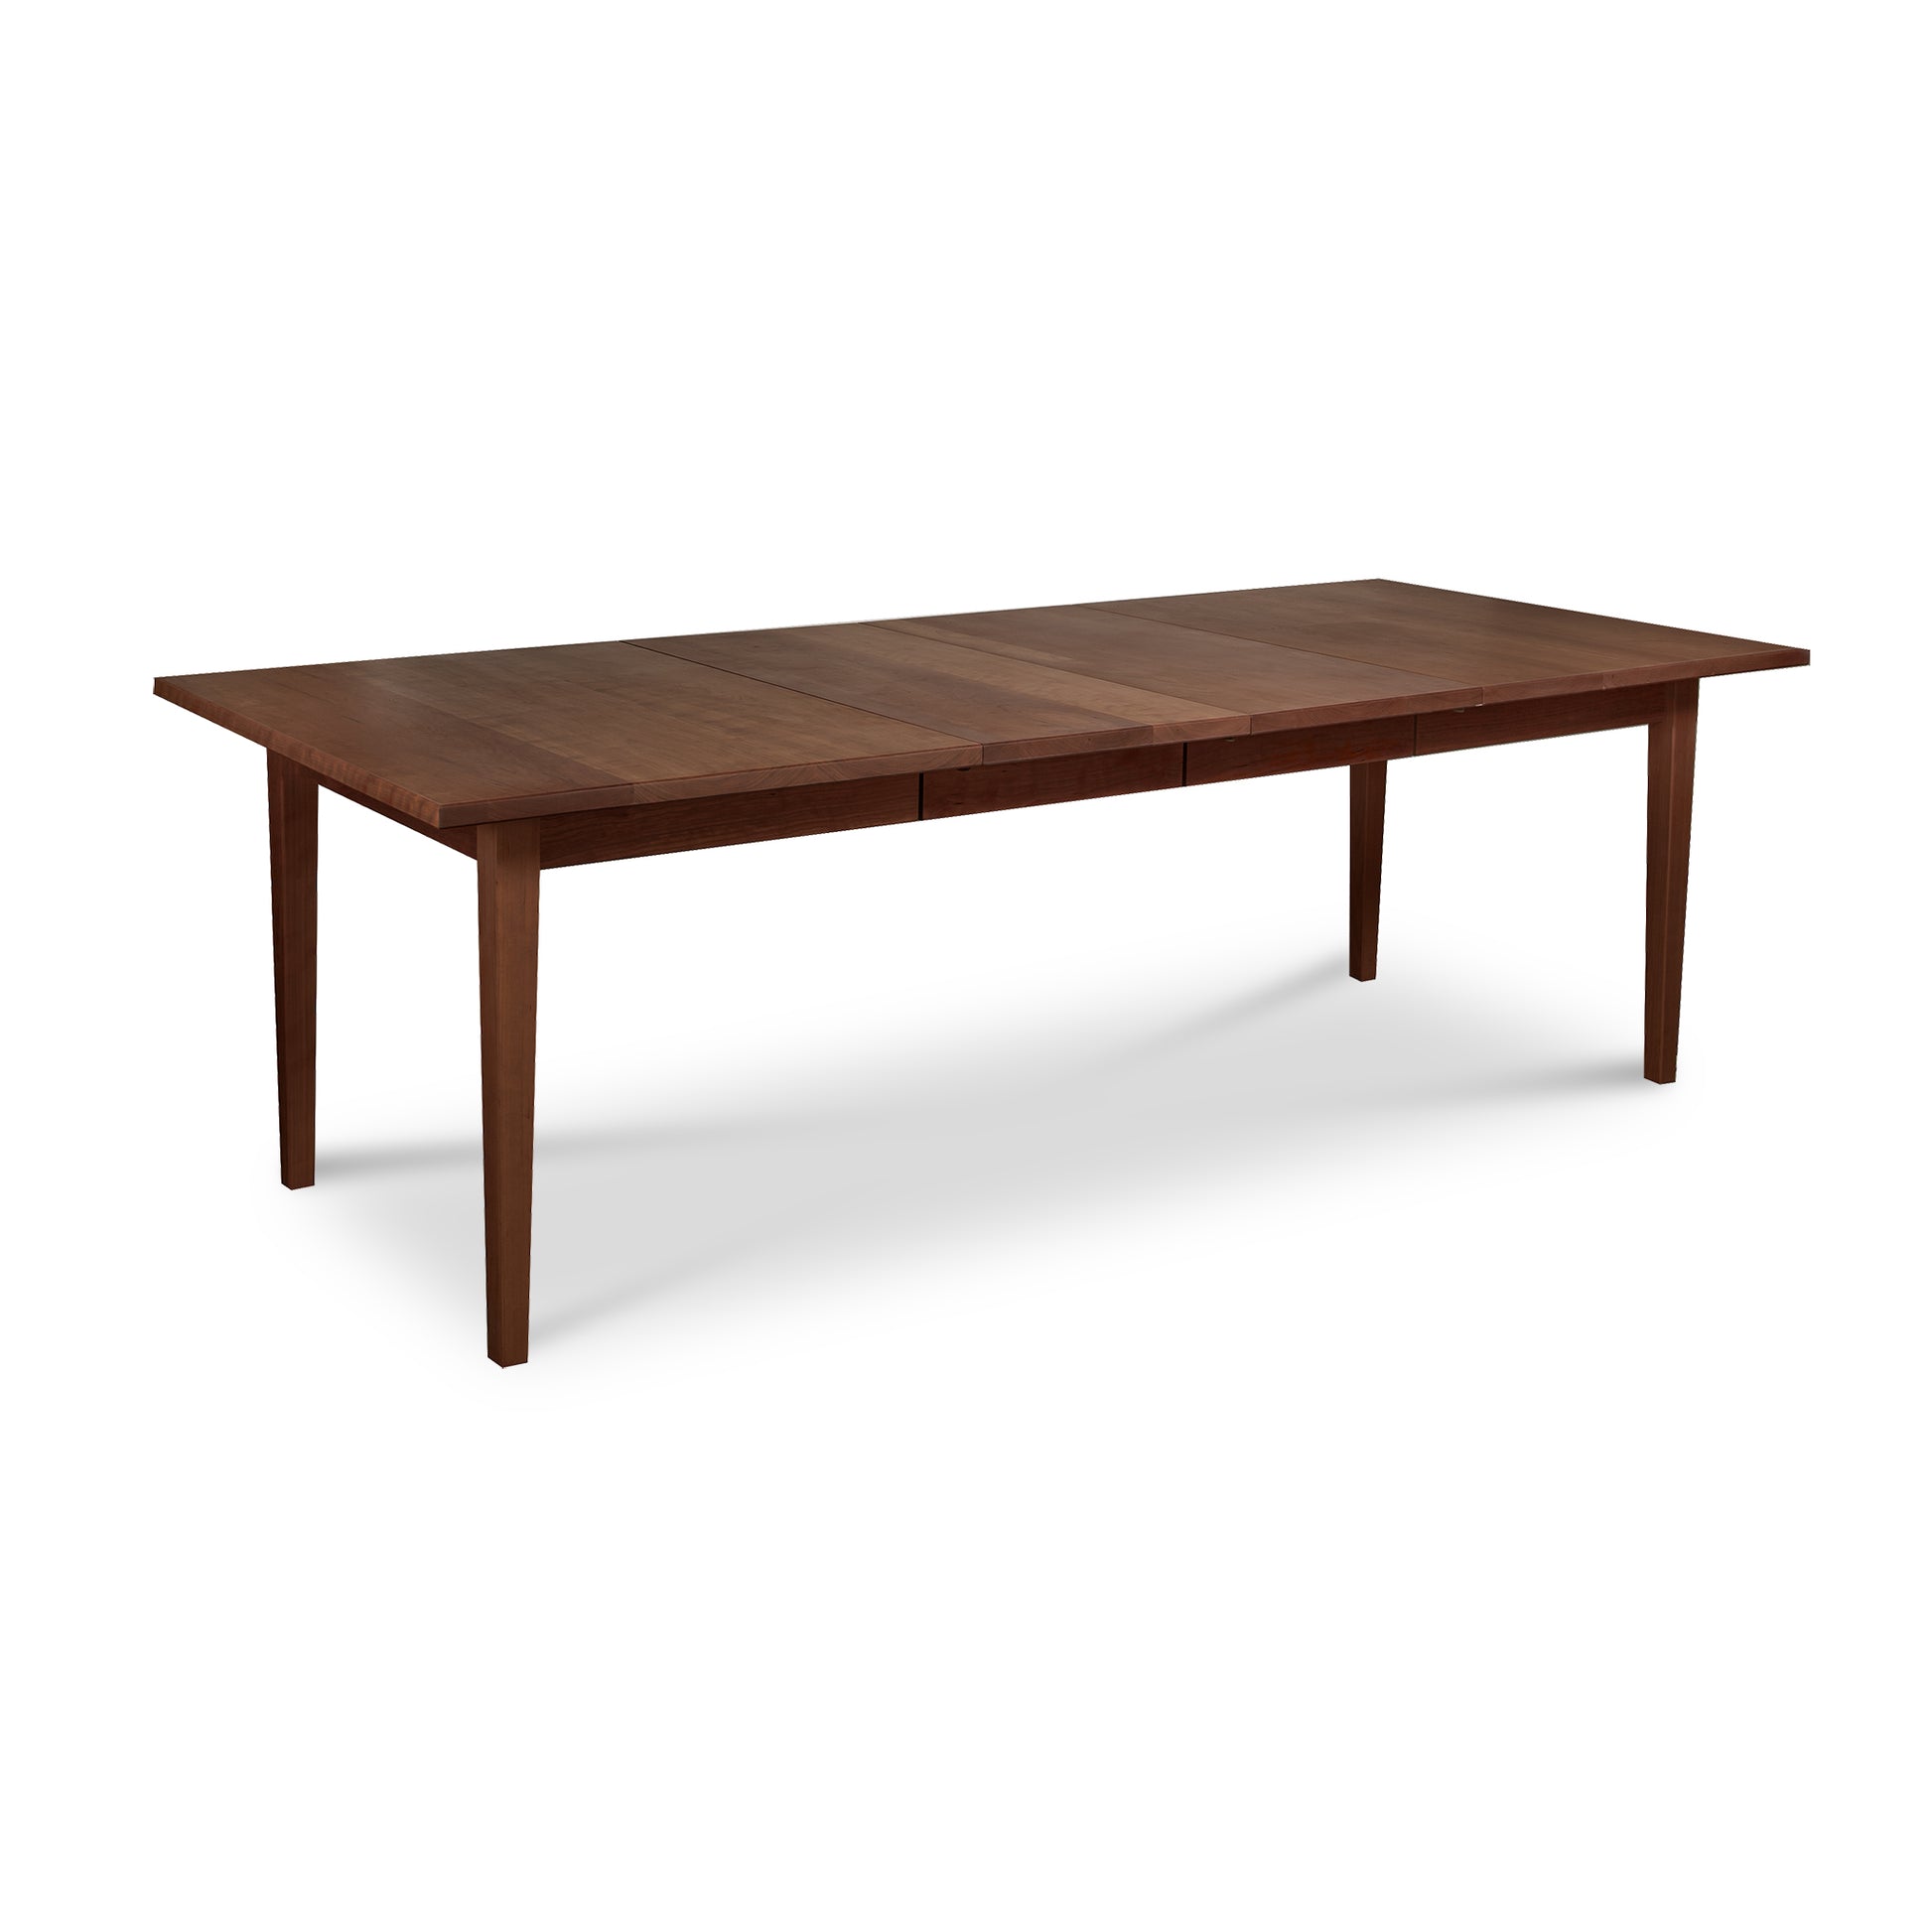 A Vermont Shaker Rectangular Extension Dining Table made of sustainably harvested wood, featuring tapered legs, displayed against a white background by Maple Corner Woodworks.